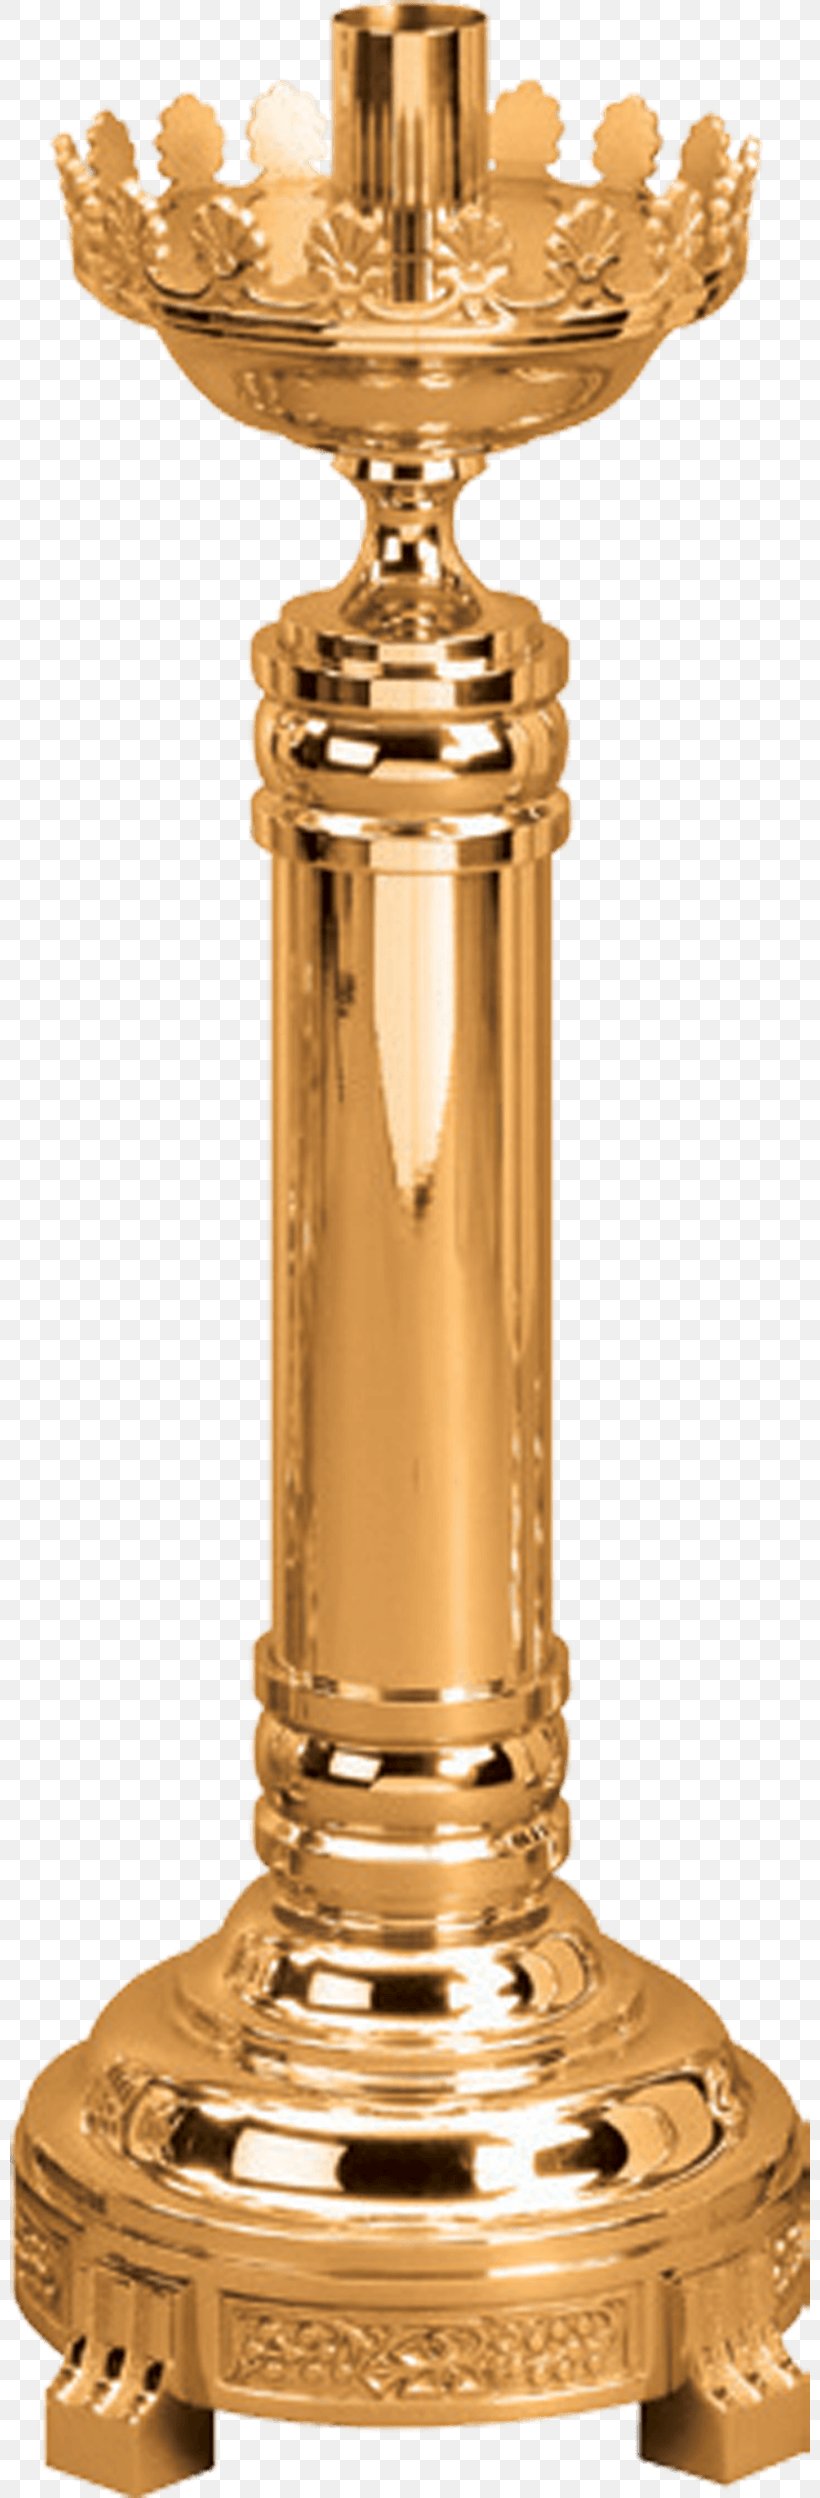 01504 Trophy Material Paschal Candle Inch, PNG, 800x2498px, Trophy, Brass, Inch, Material, Metal Download Free